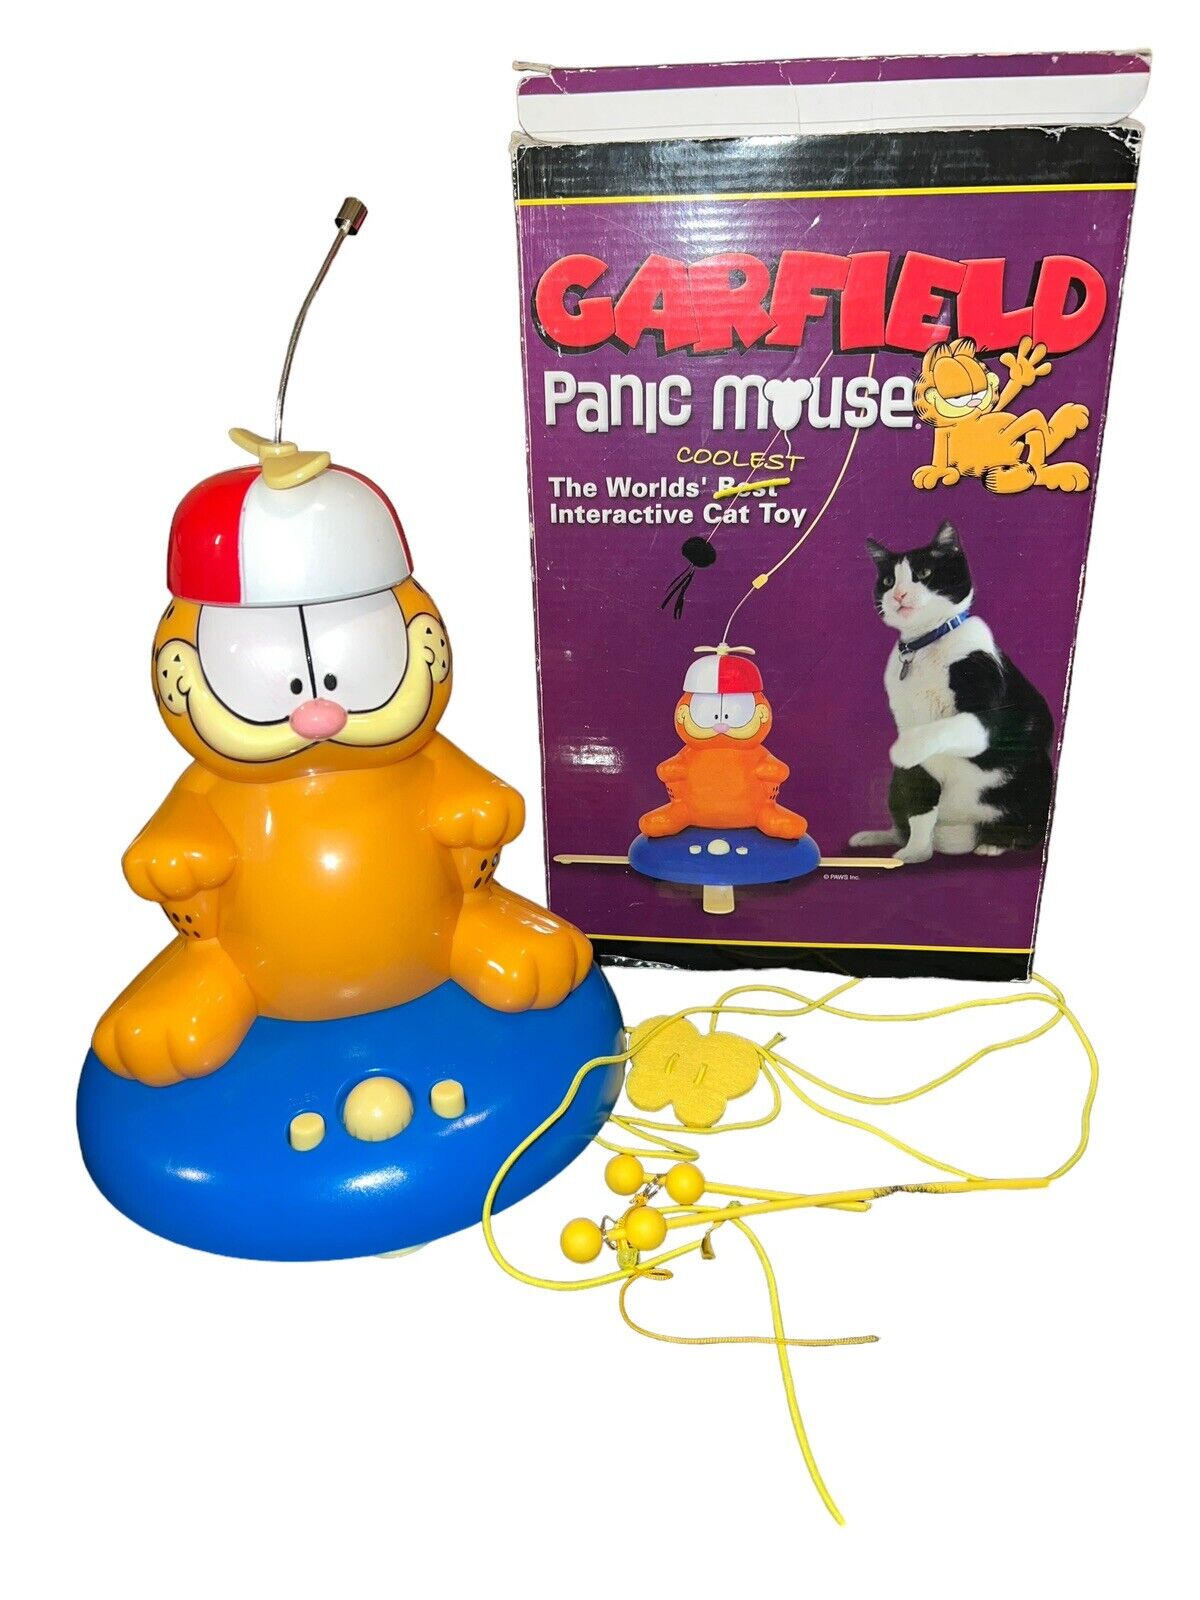 2002 Garfield Panic Mouse Cat Toy-works